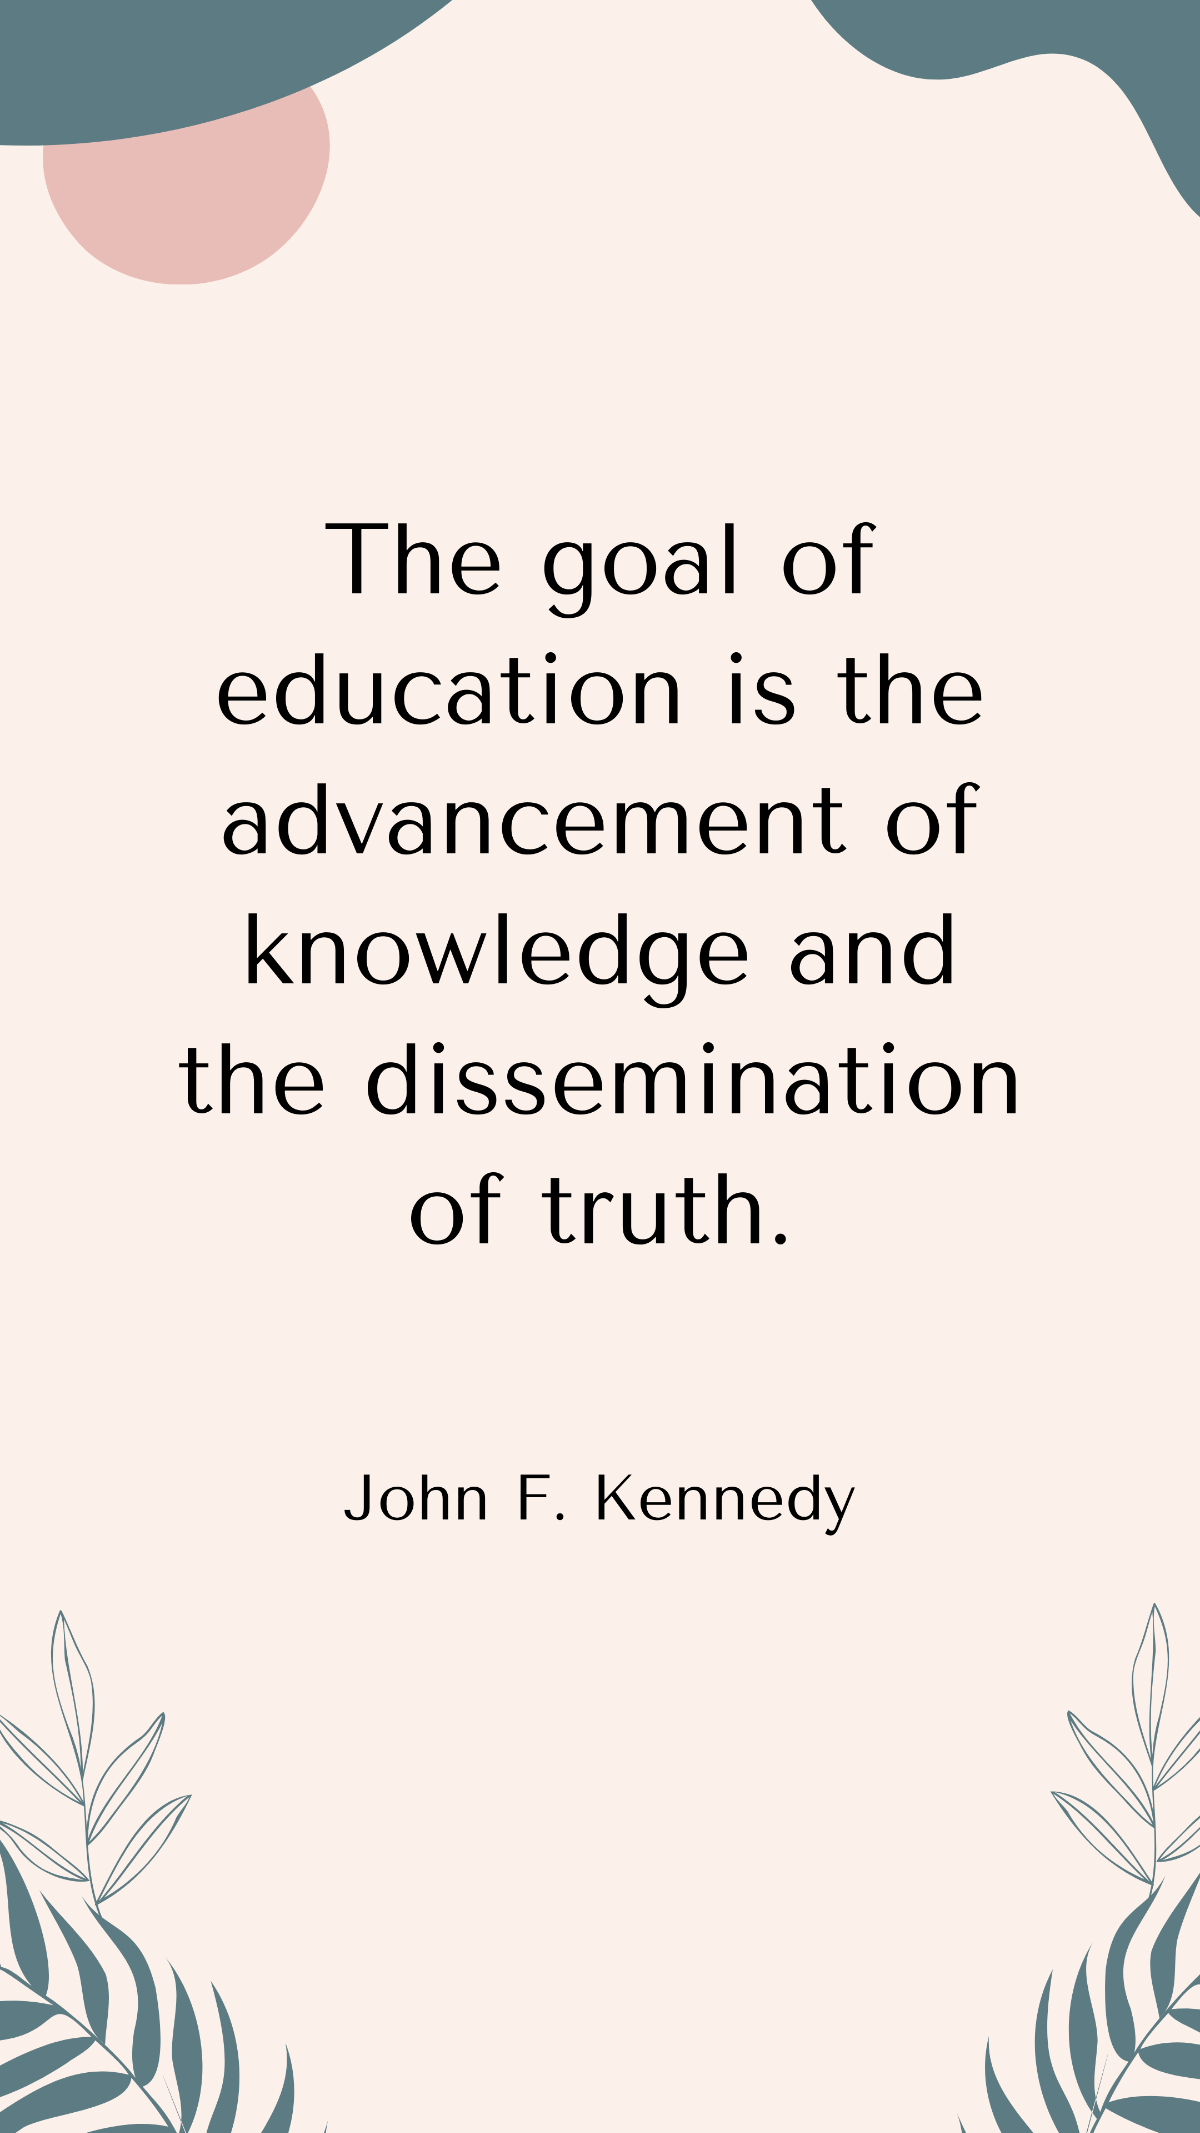 John F. Kennedy - The goal of education is the advancement of knowledge and the dissemination of truth.